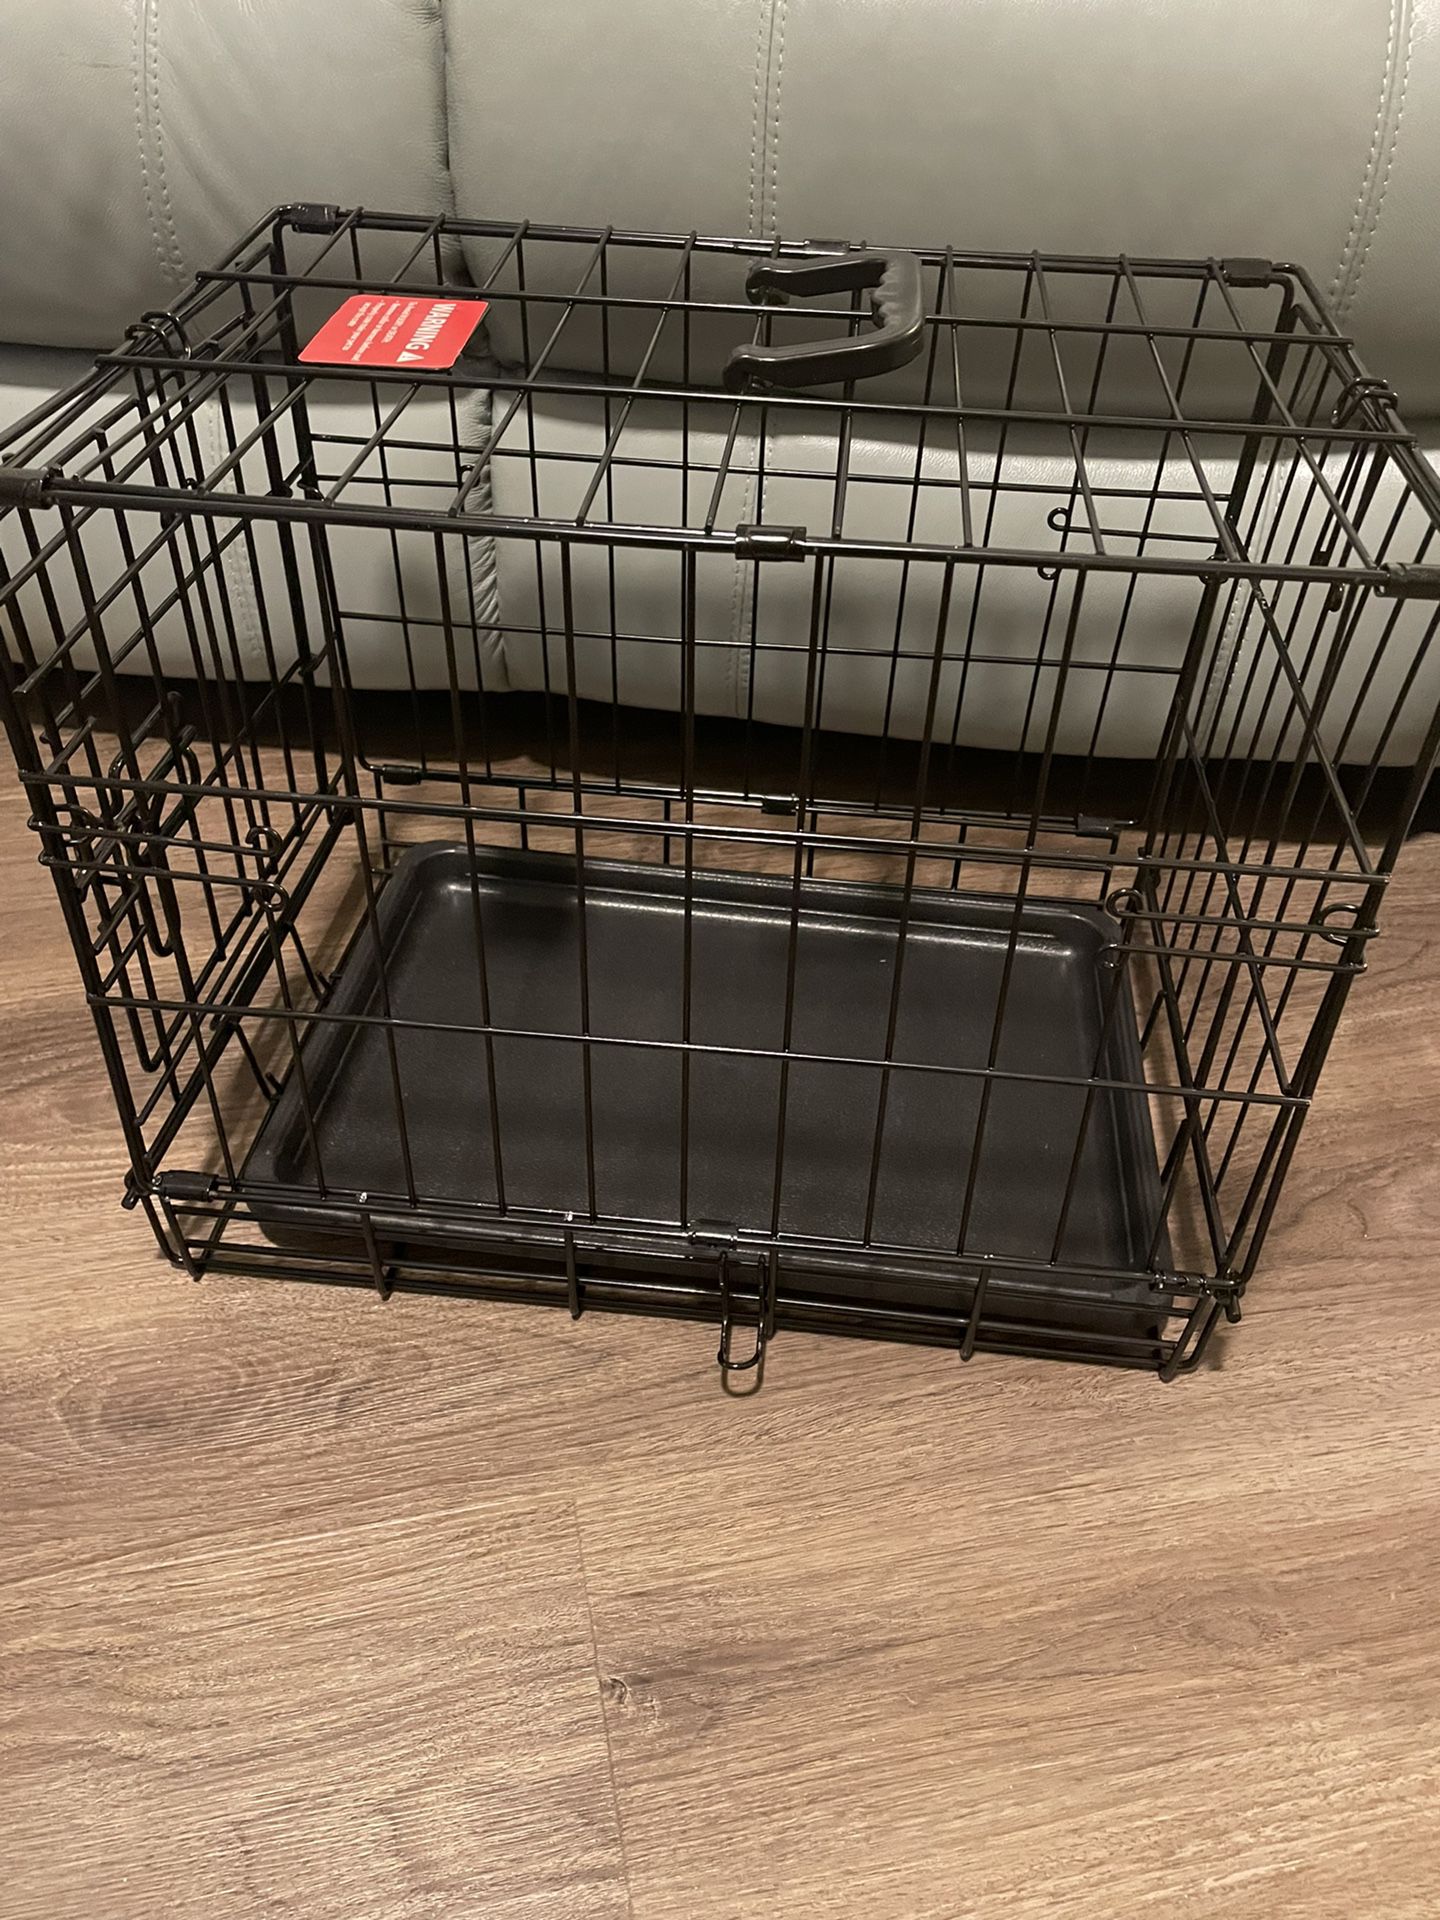 Top-Paw small Dog Cage